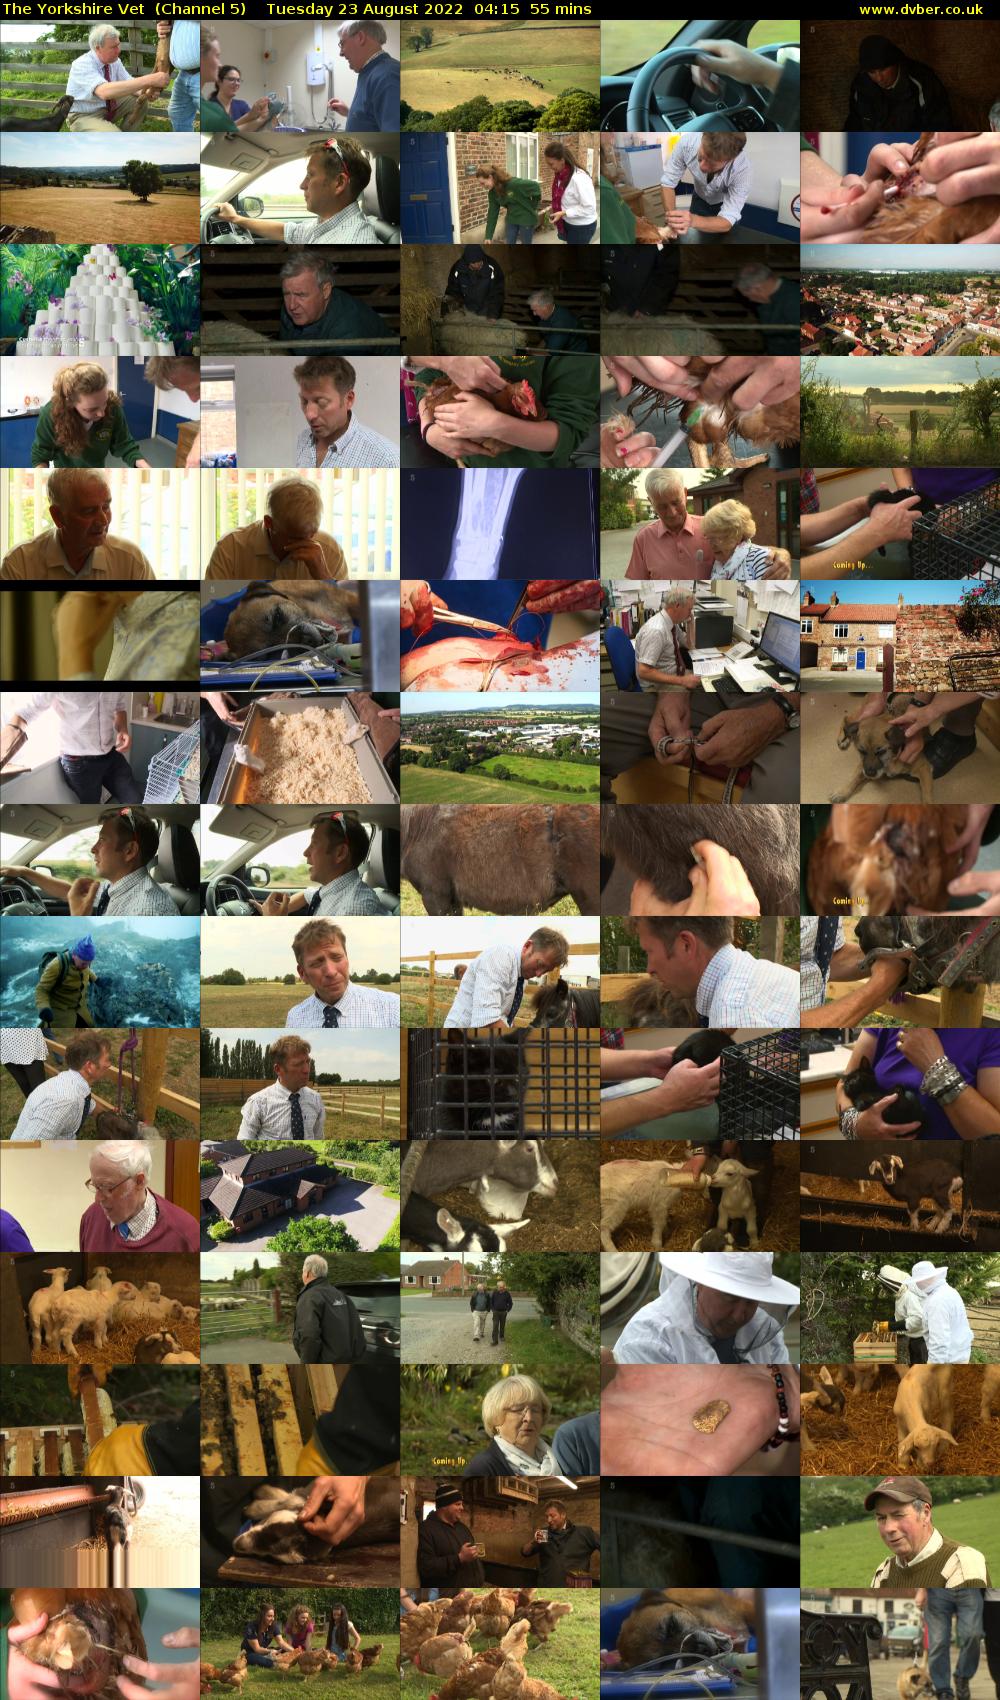 The Yorkshire Vet  (Channel 5) Tuesday 23 August 2022 04:15 - 05:10